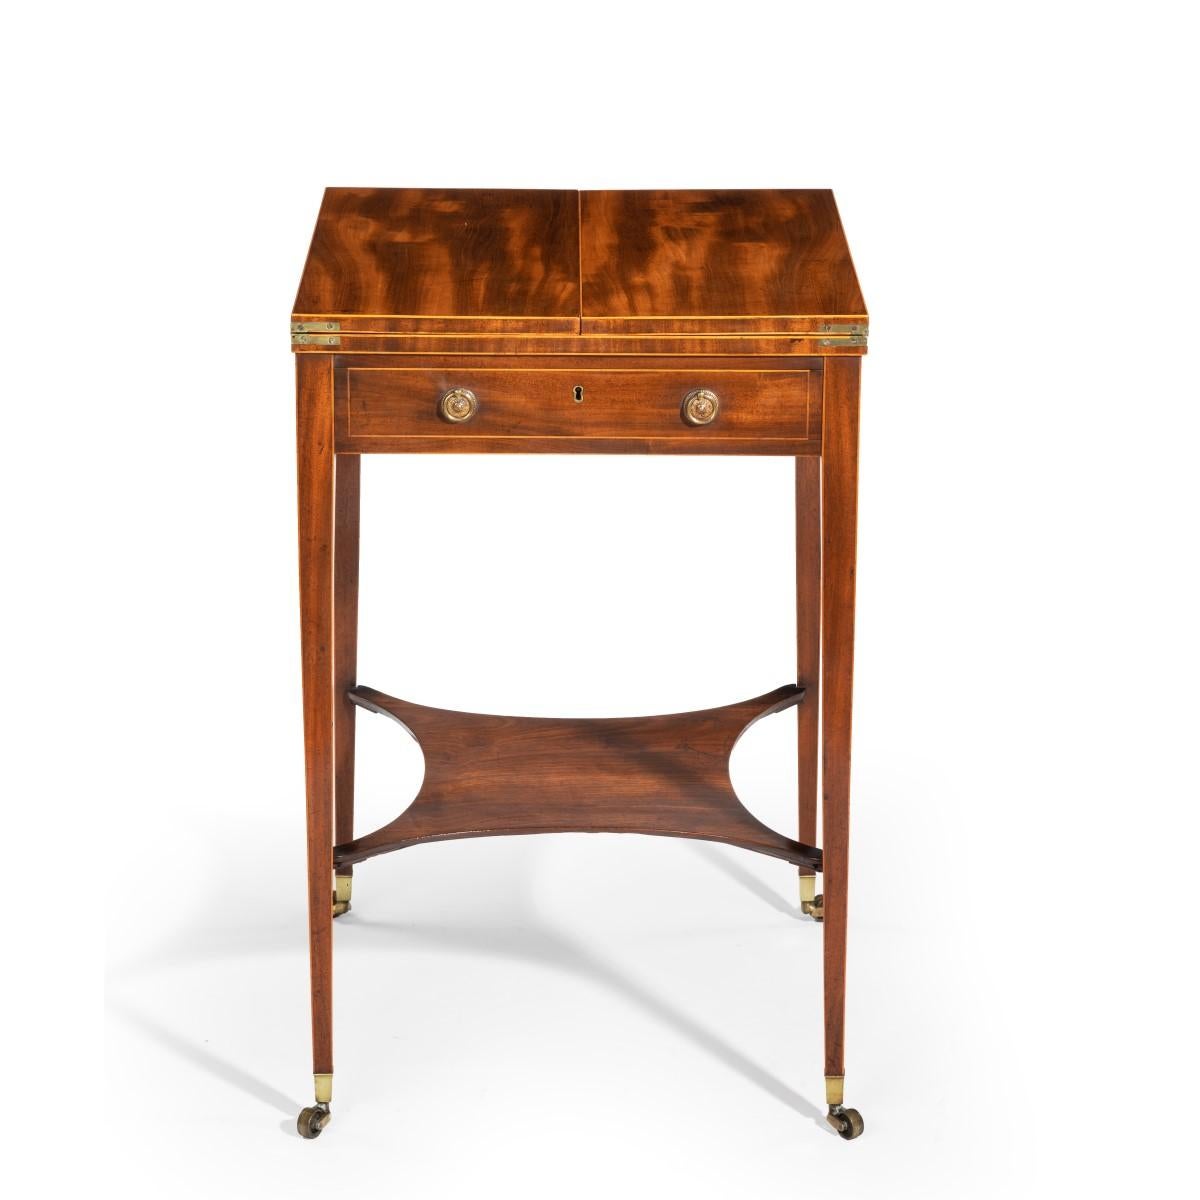 A Sheraton period George III mahogany patience table, the rectangular top with a drawer front with brass handles on each side, two hinged to support two flaps which open to form a rectangular top, set on slender tapering legs joined by a shaped